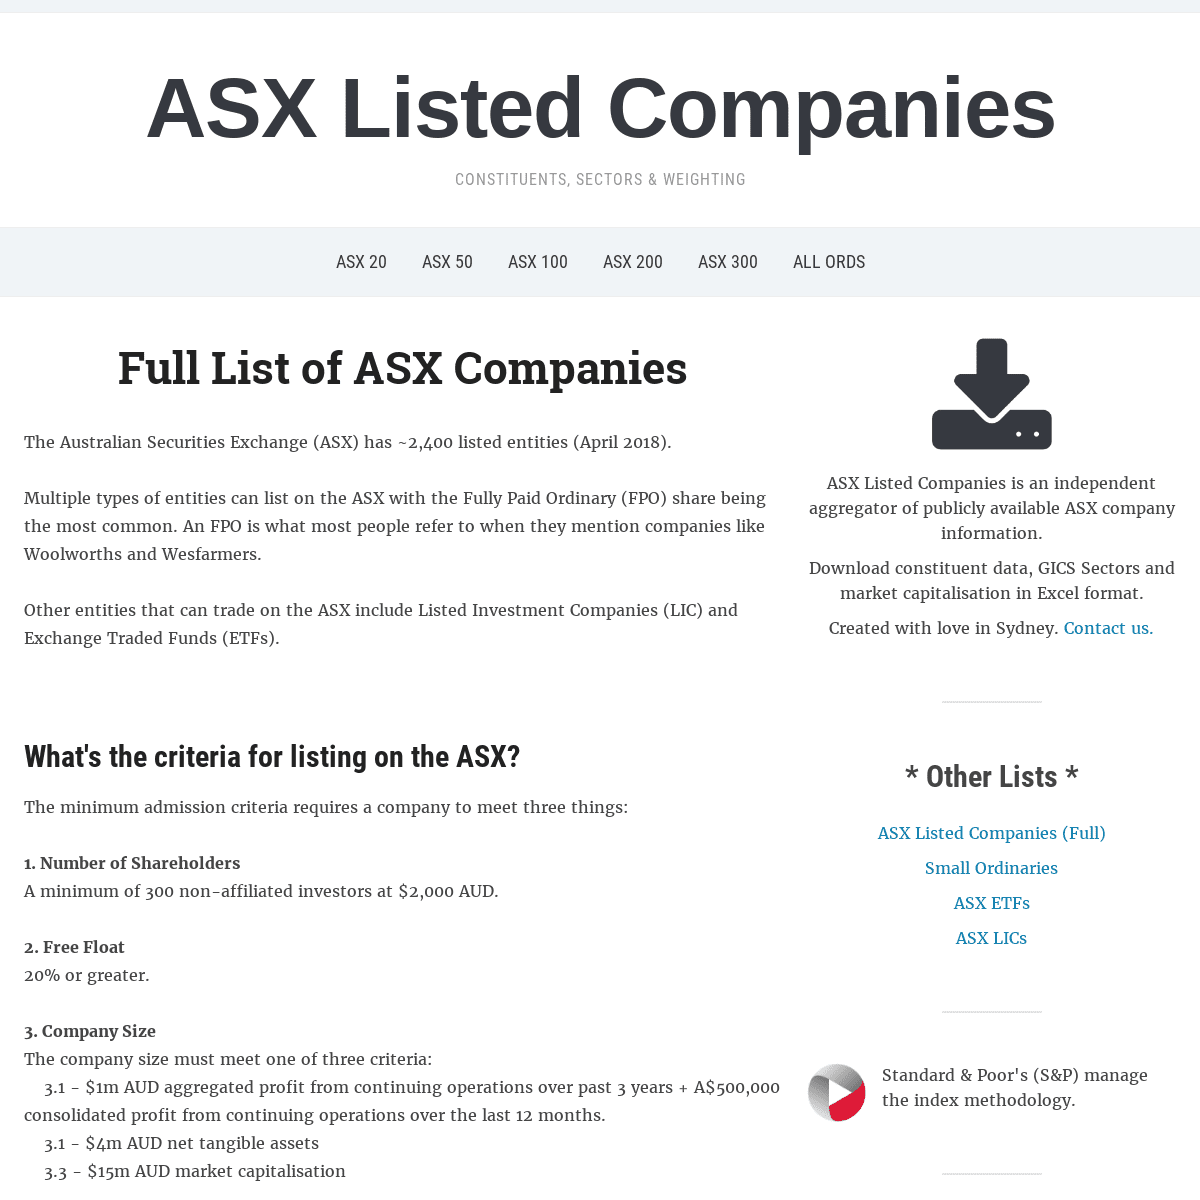 ASX Listed Companies (Download CSV & Market Caps)